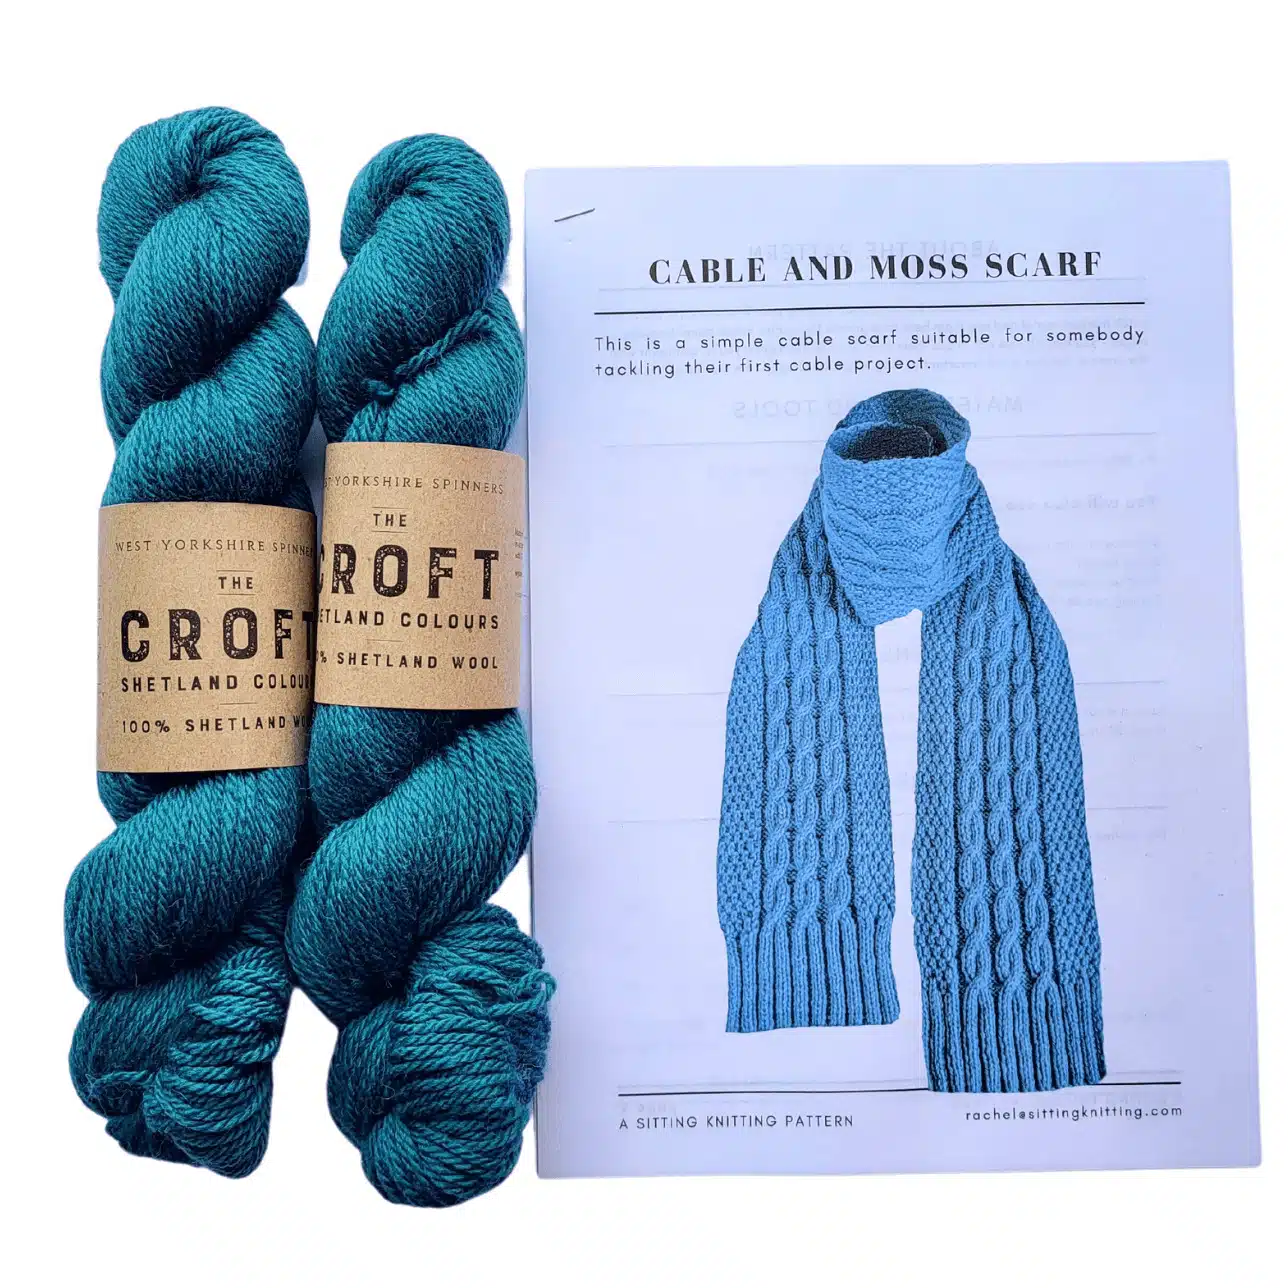 Sitting Knitting Kits - cable and moss scarf - standard